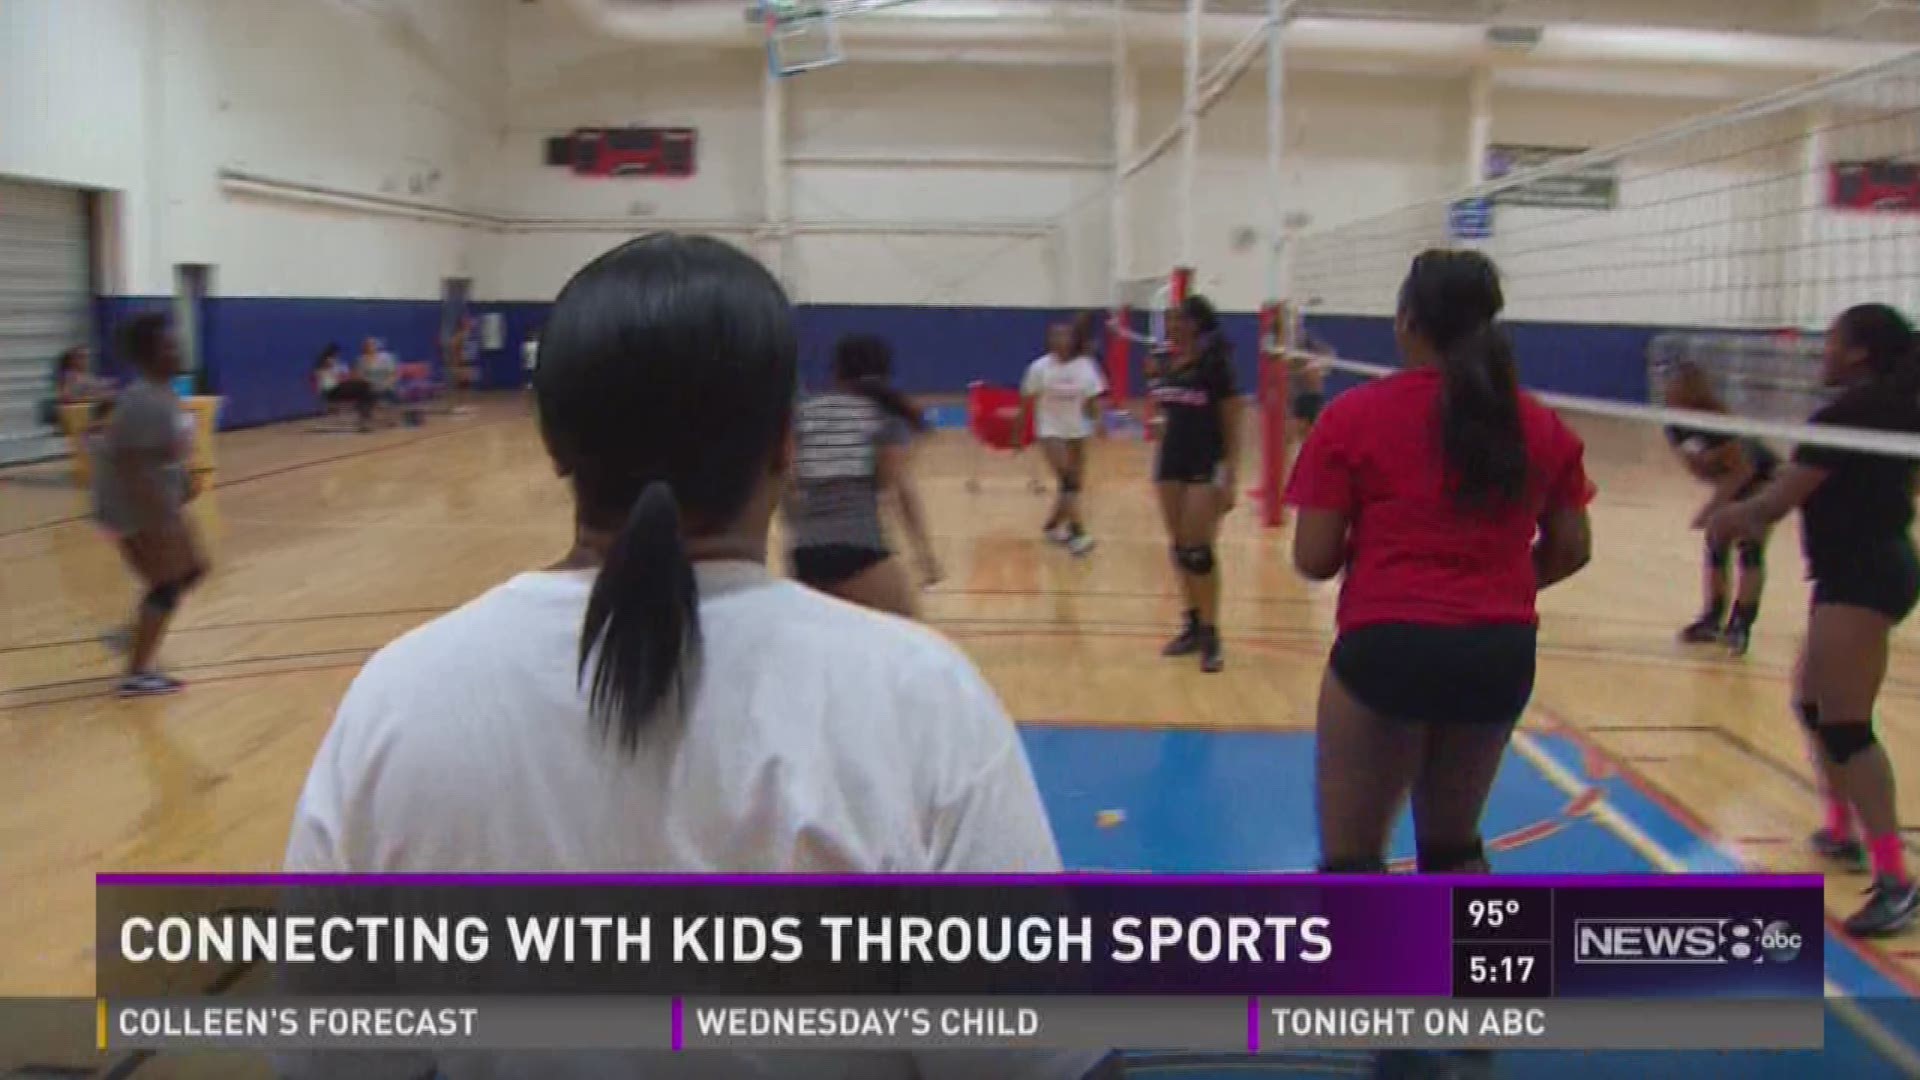 Connecting with kids through sports